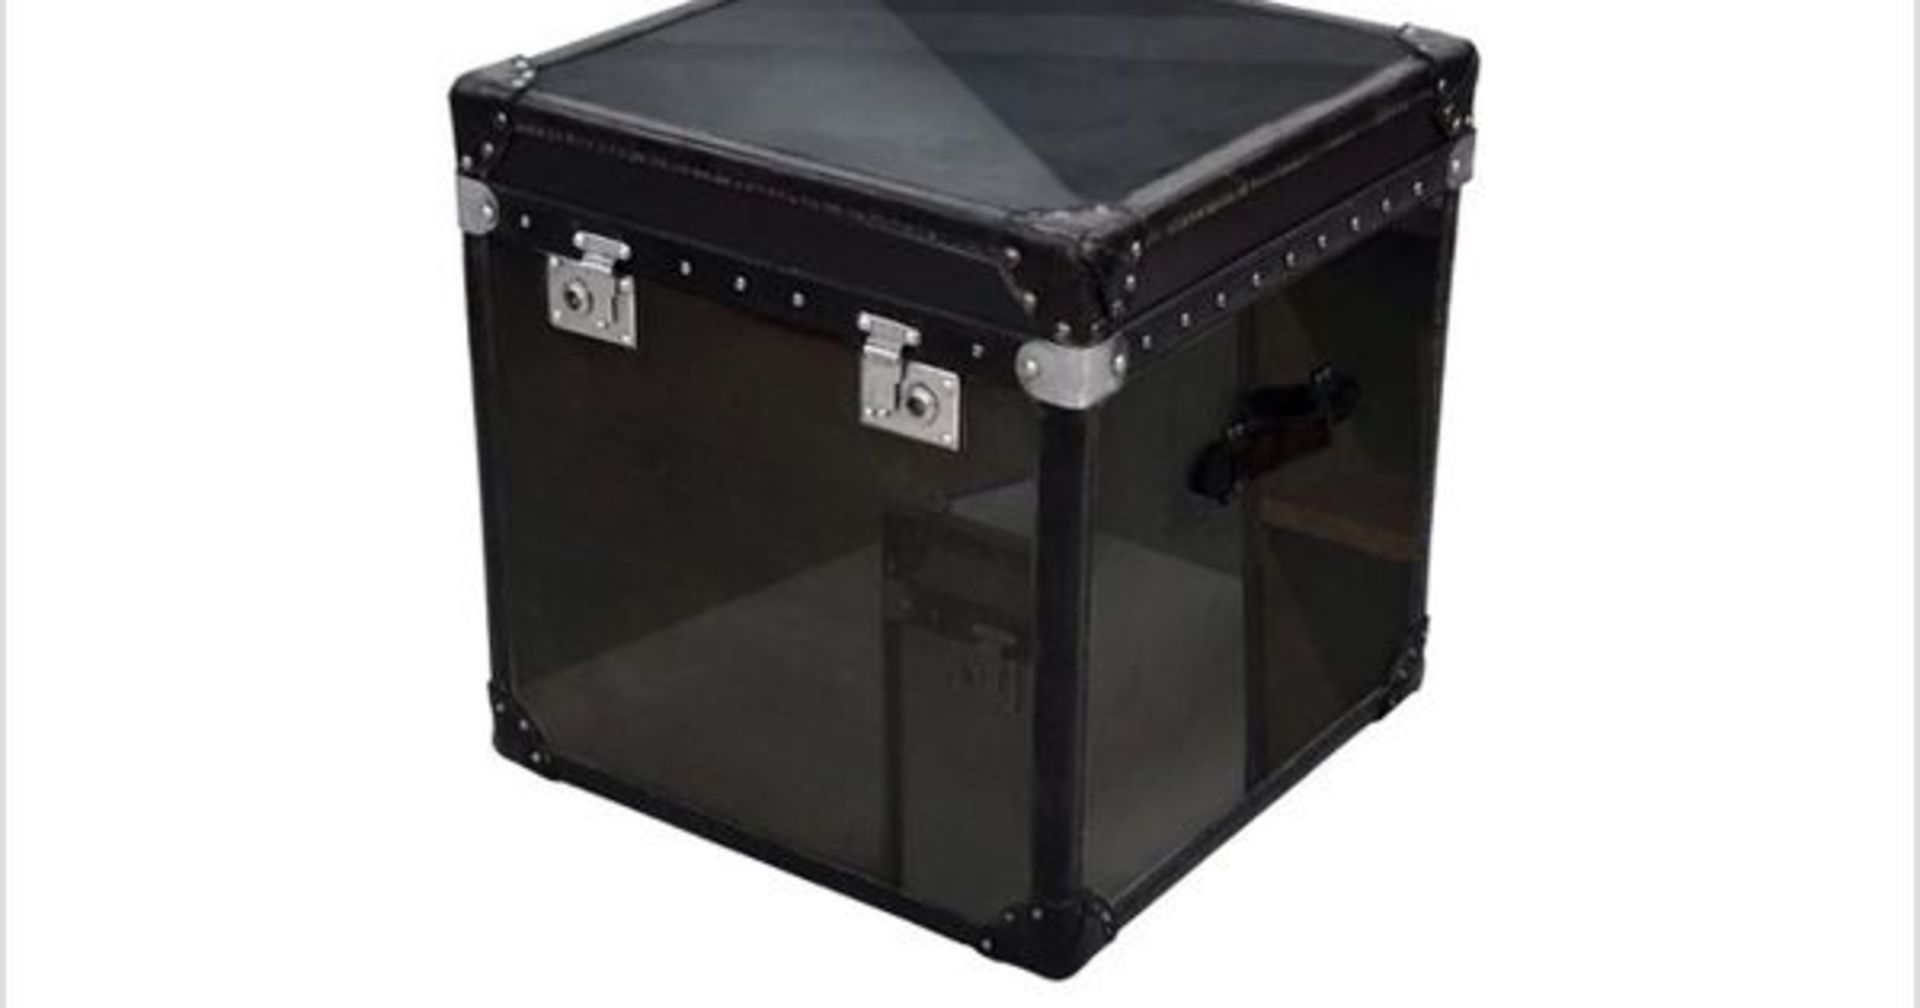 Paris Trunk Black Steel This Authentic Trunk Truly Speaks The Heritage Of The Brand I